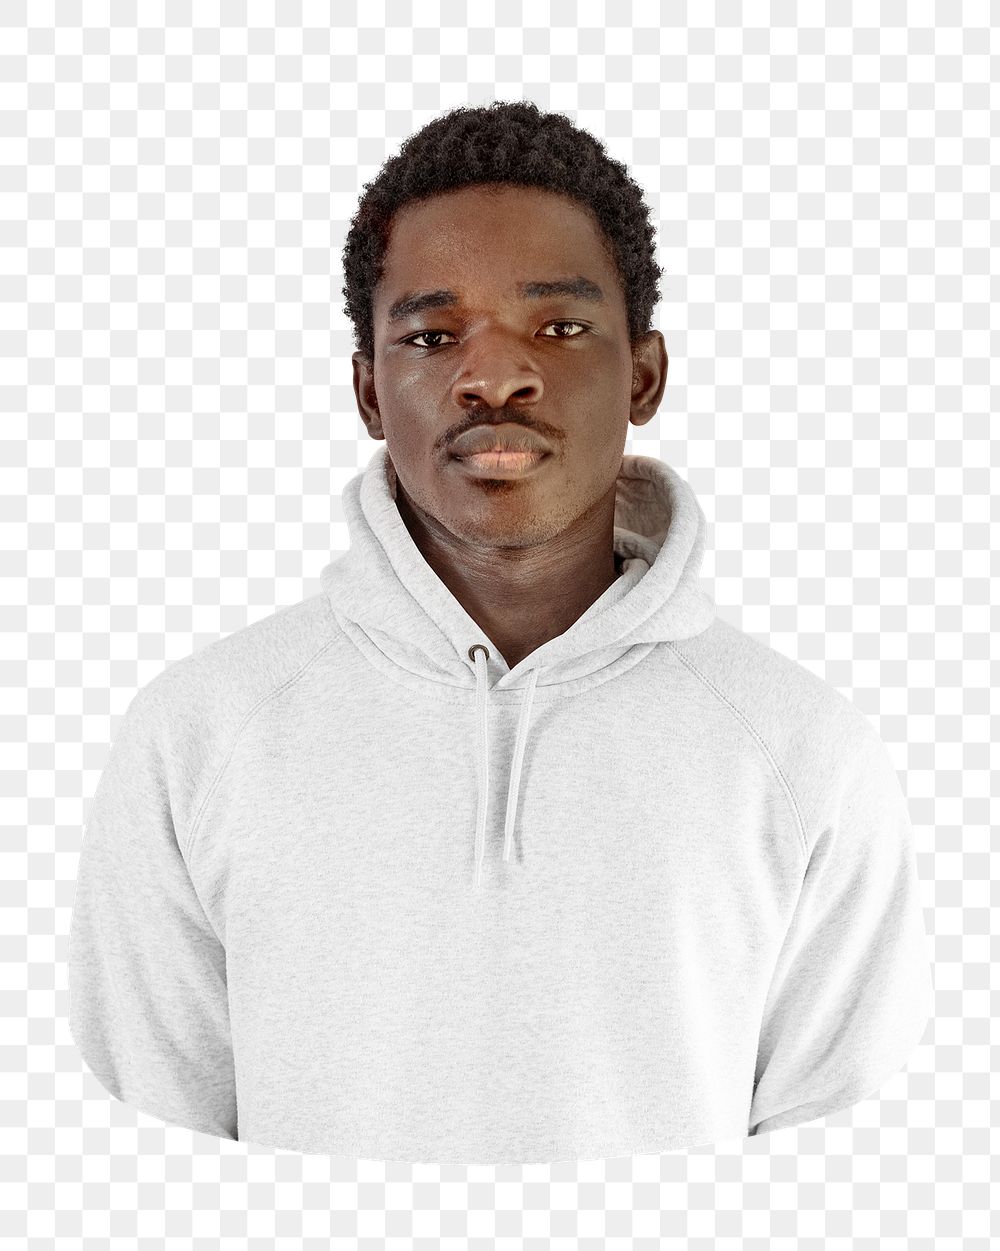 Men's white hoodie png on African American model, transparent background